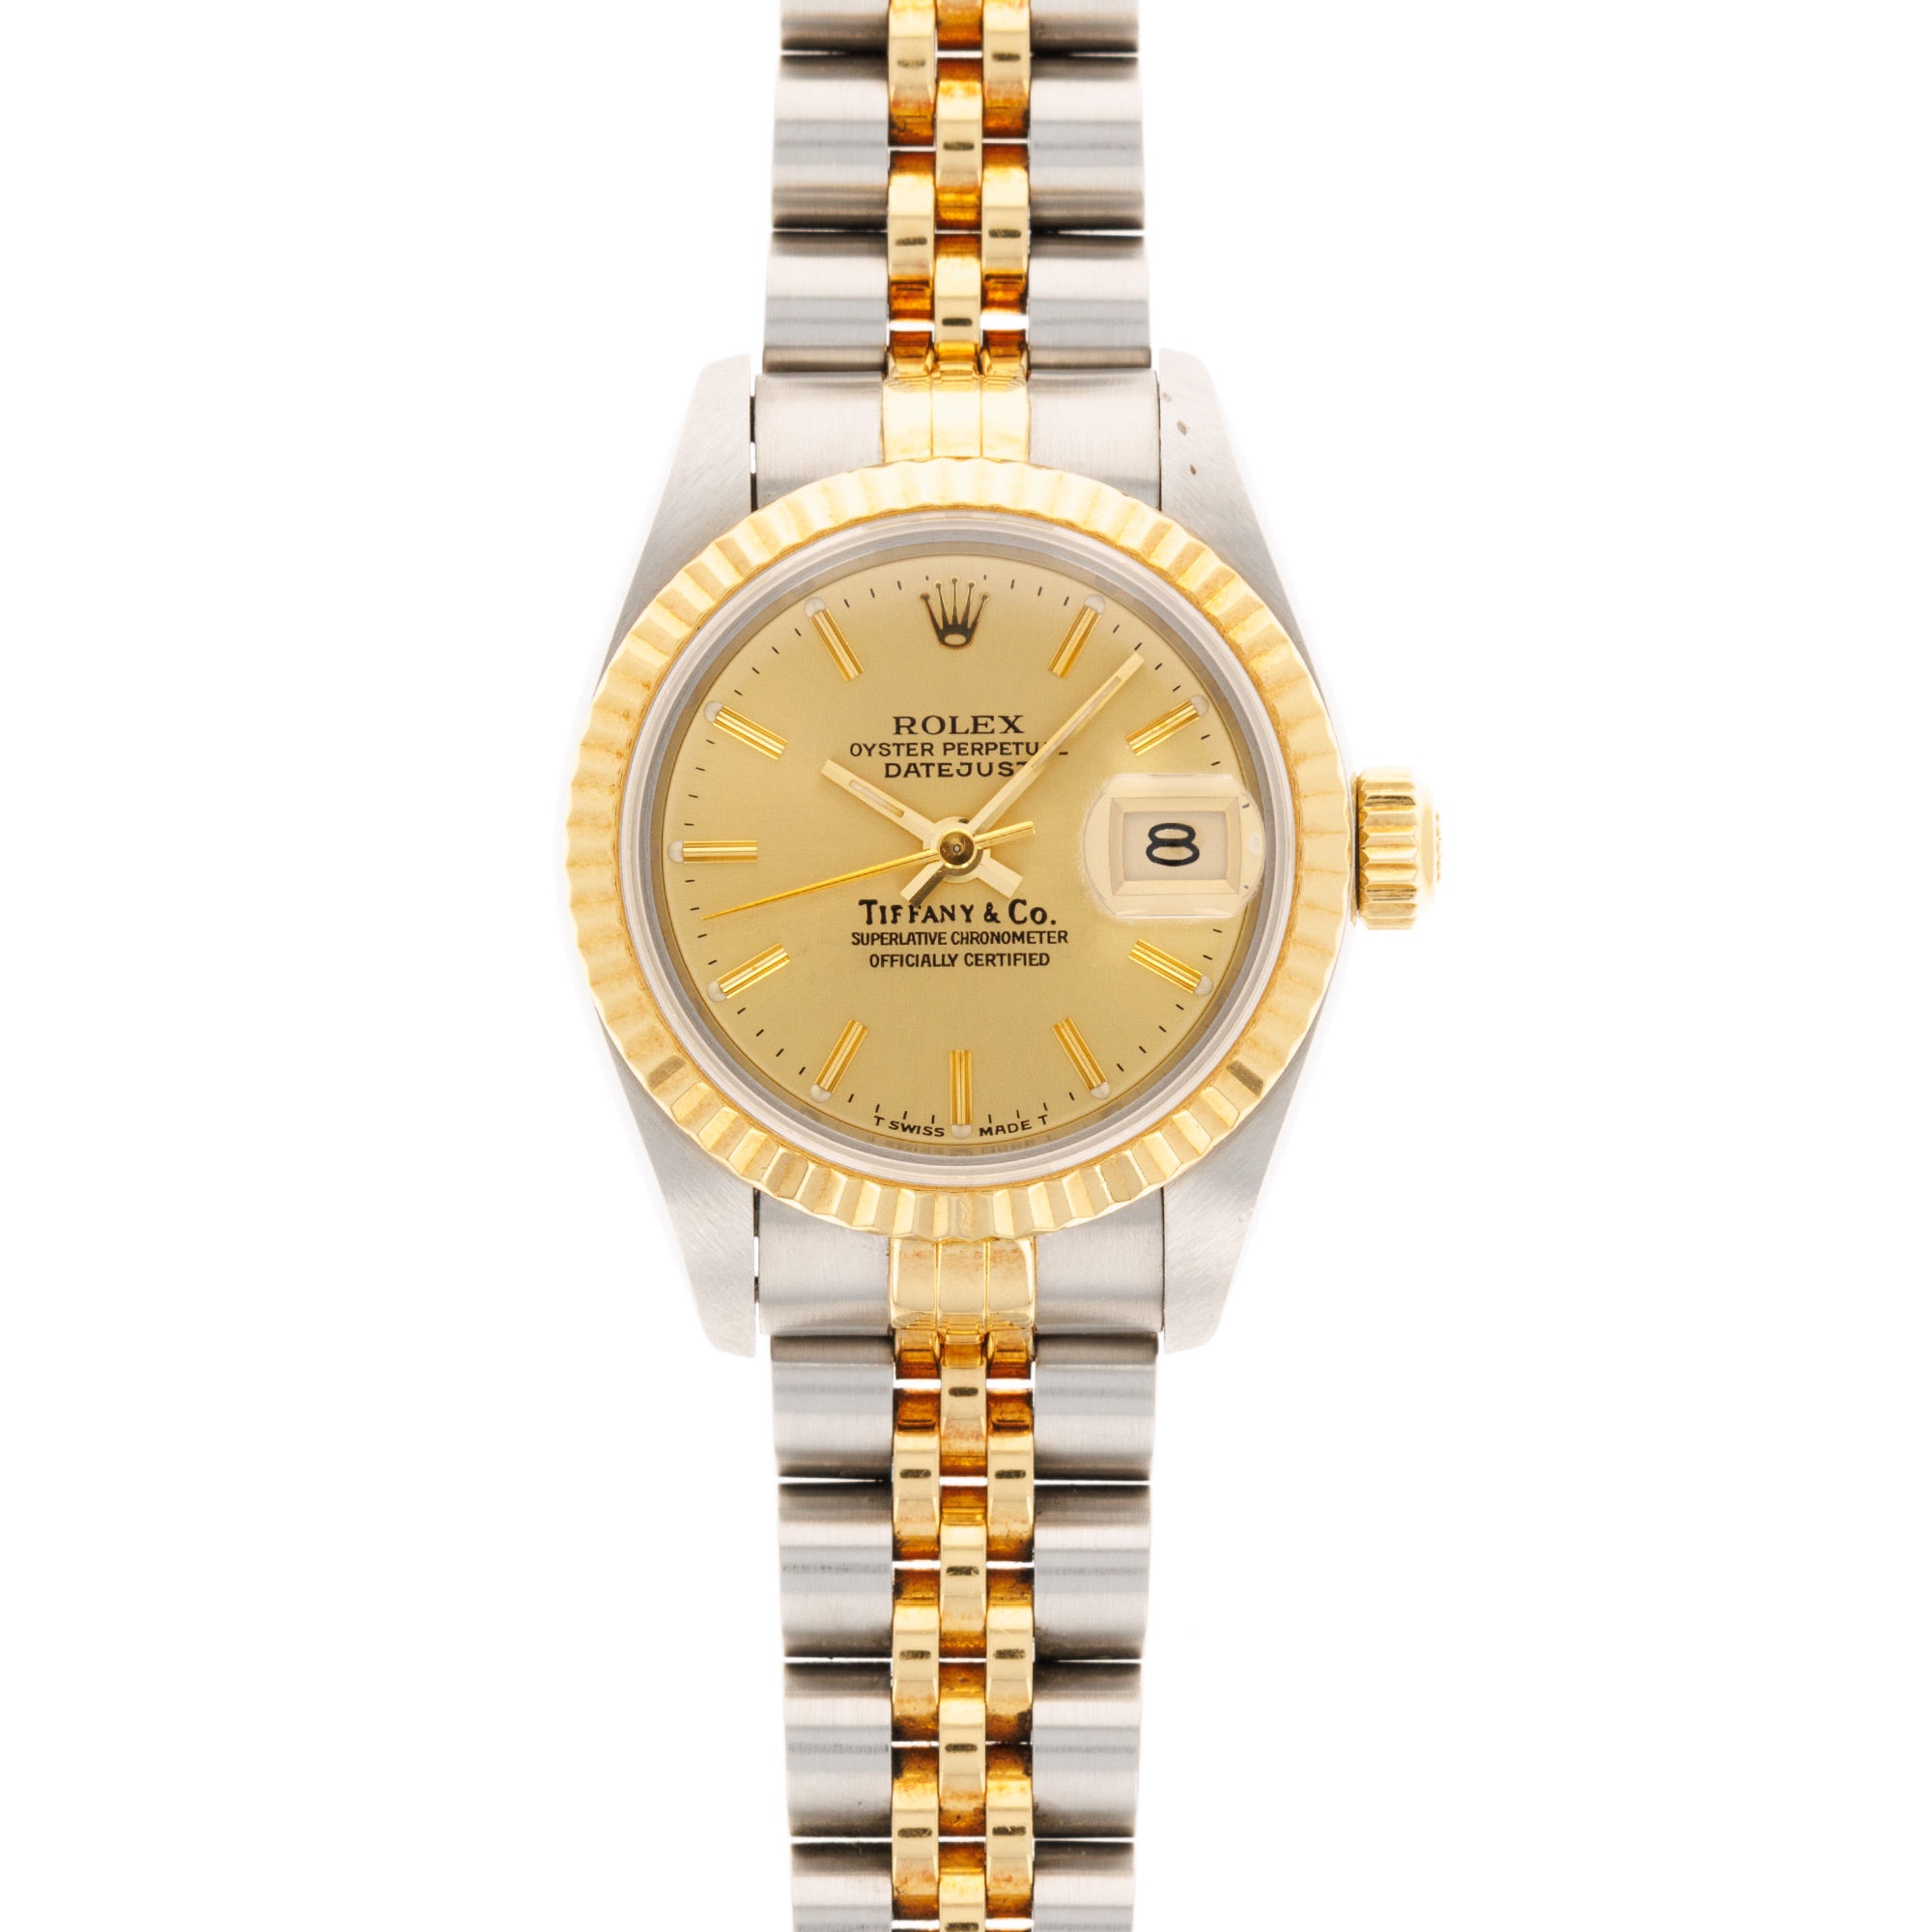 Rolex - Rolex Two-Tone Datejust ref 69173 with Tiffany Dial - The Keystone Watches